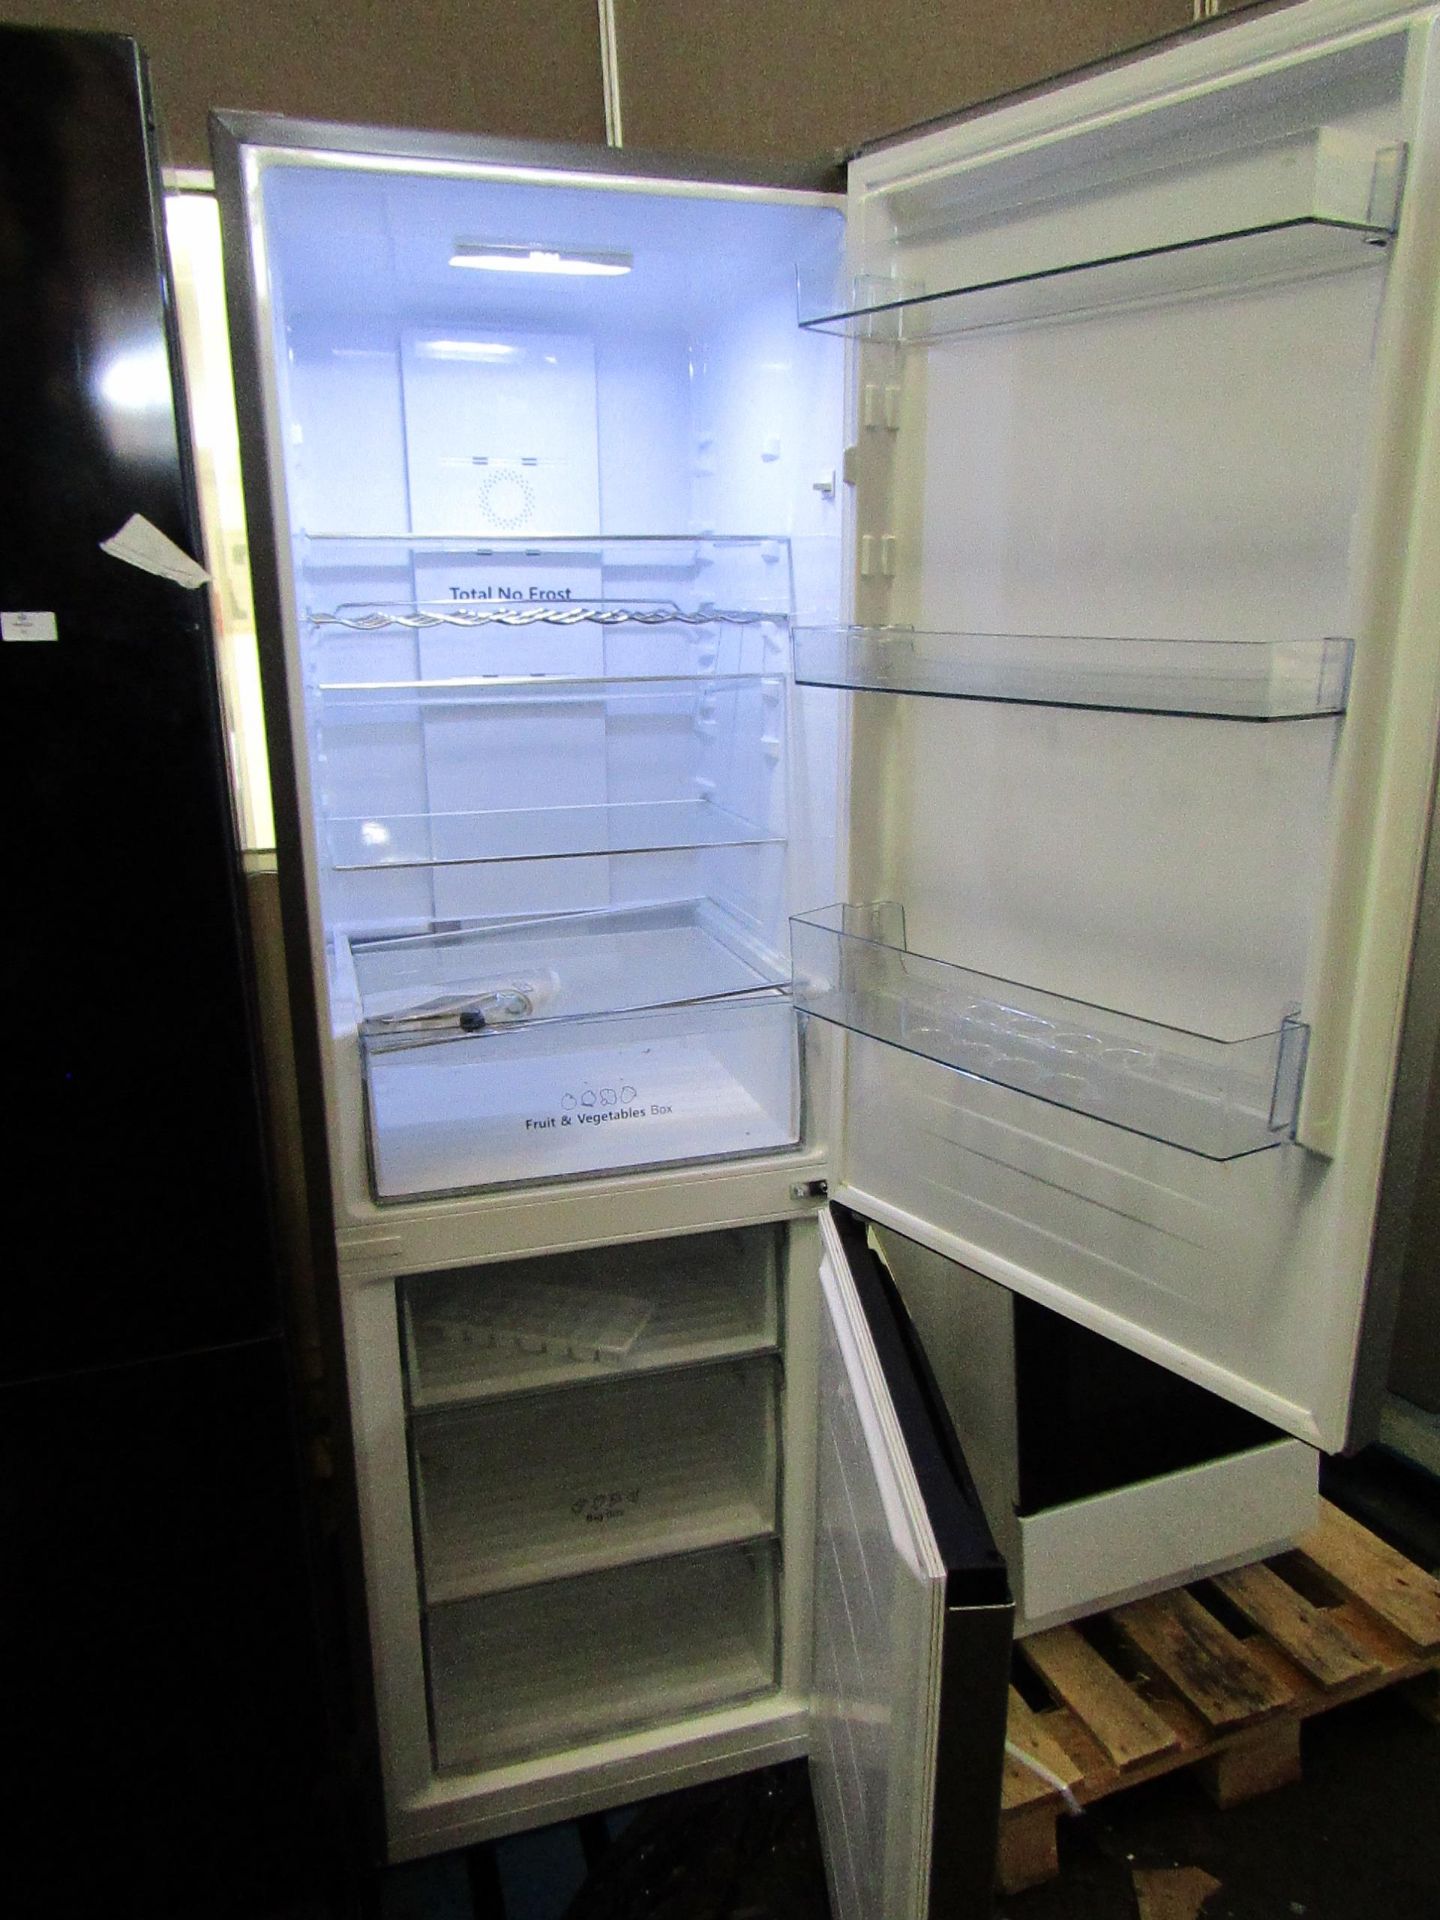 Hisense 60/40 fridge freezer, could do with a wipe over but no major damage - Image 2 of 2